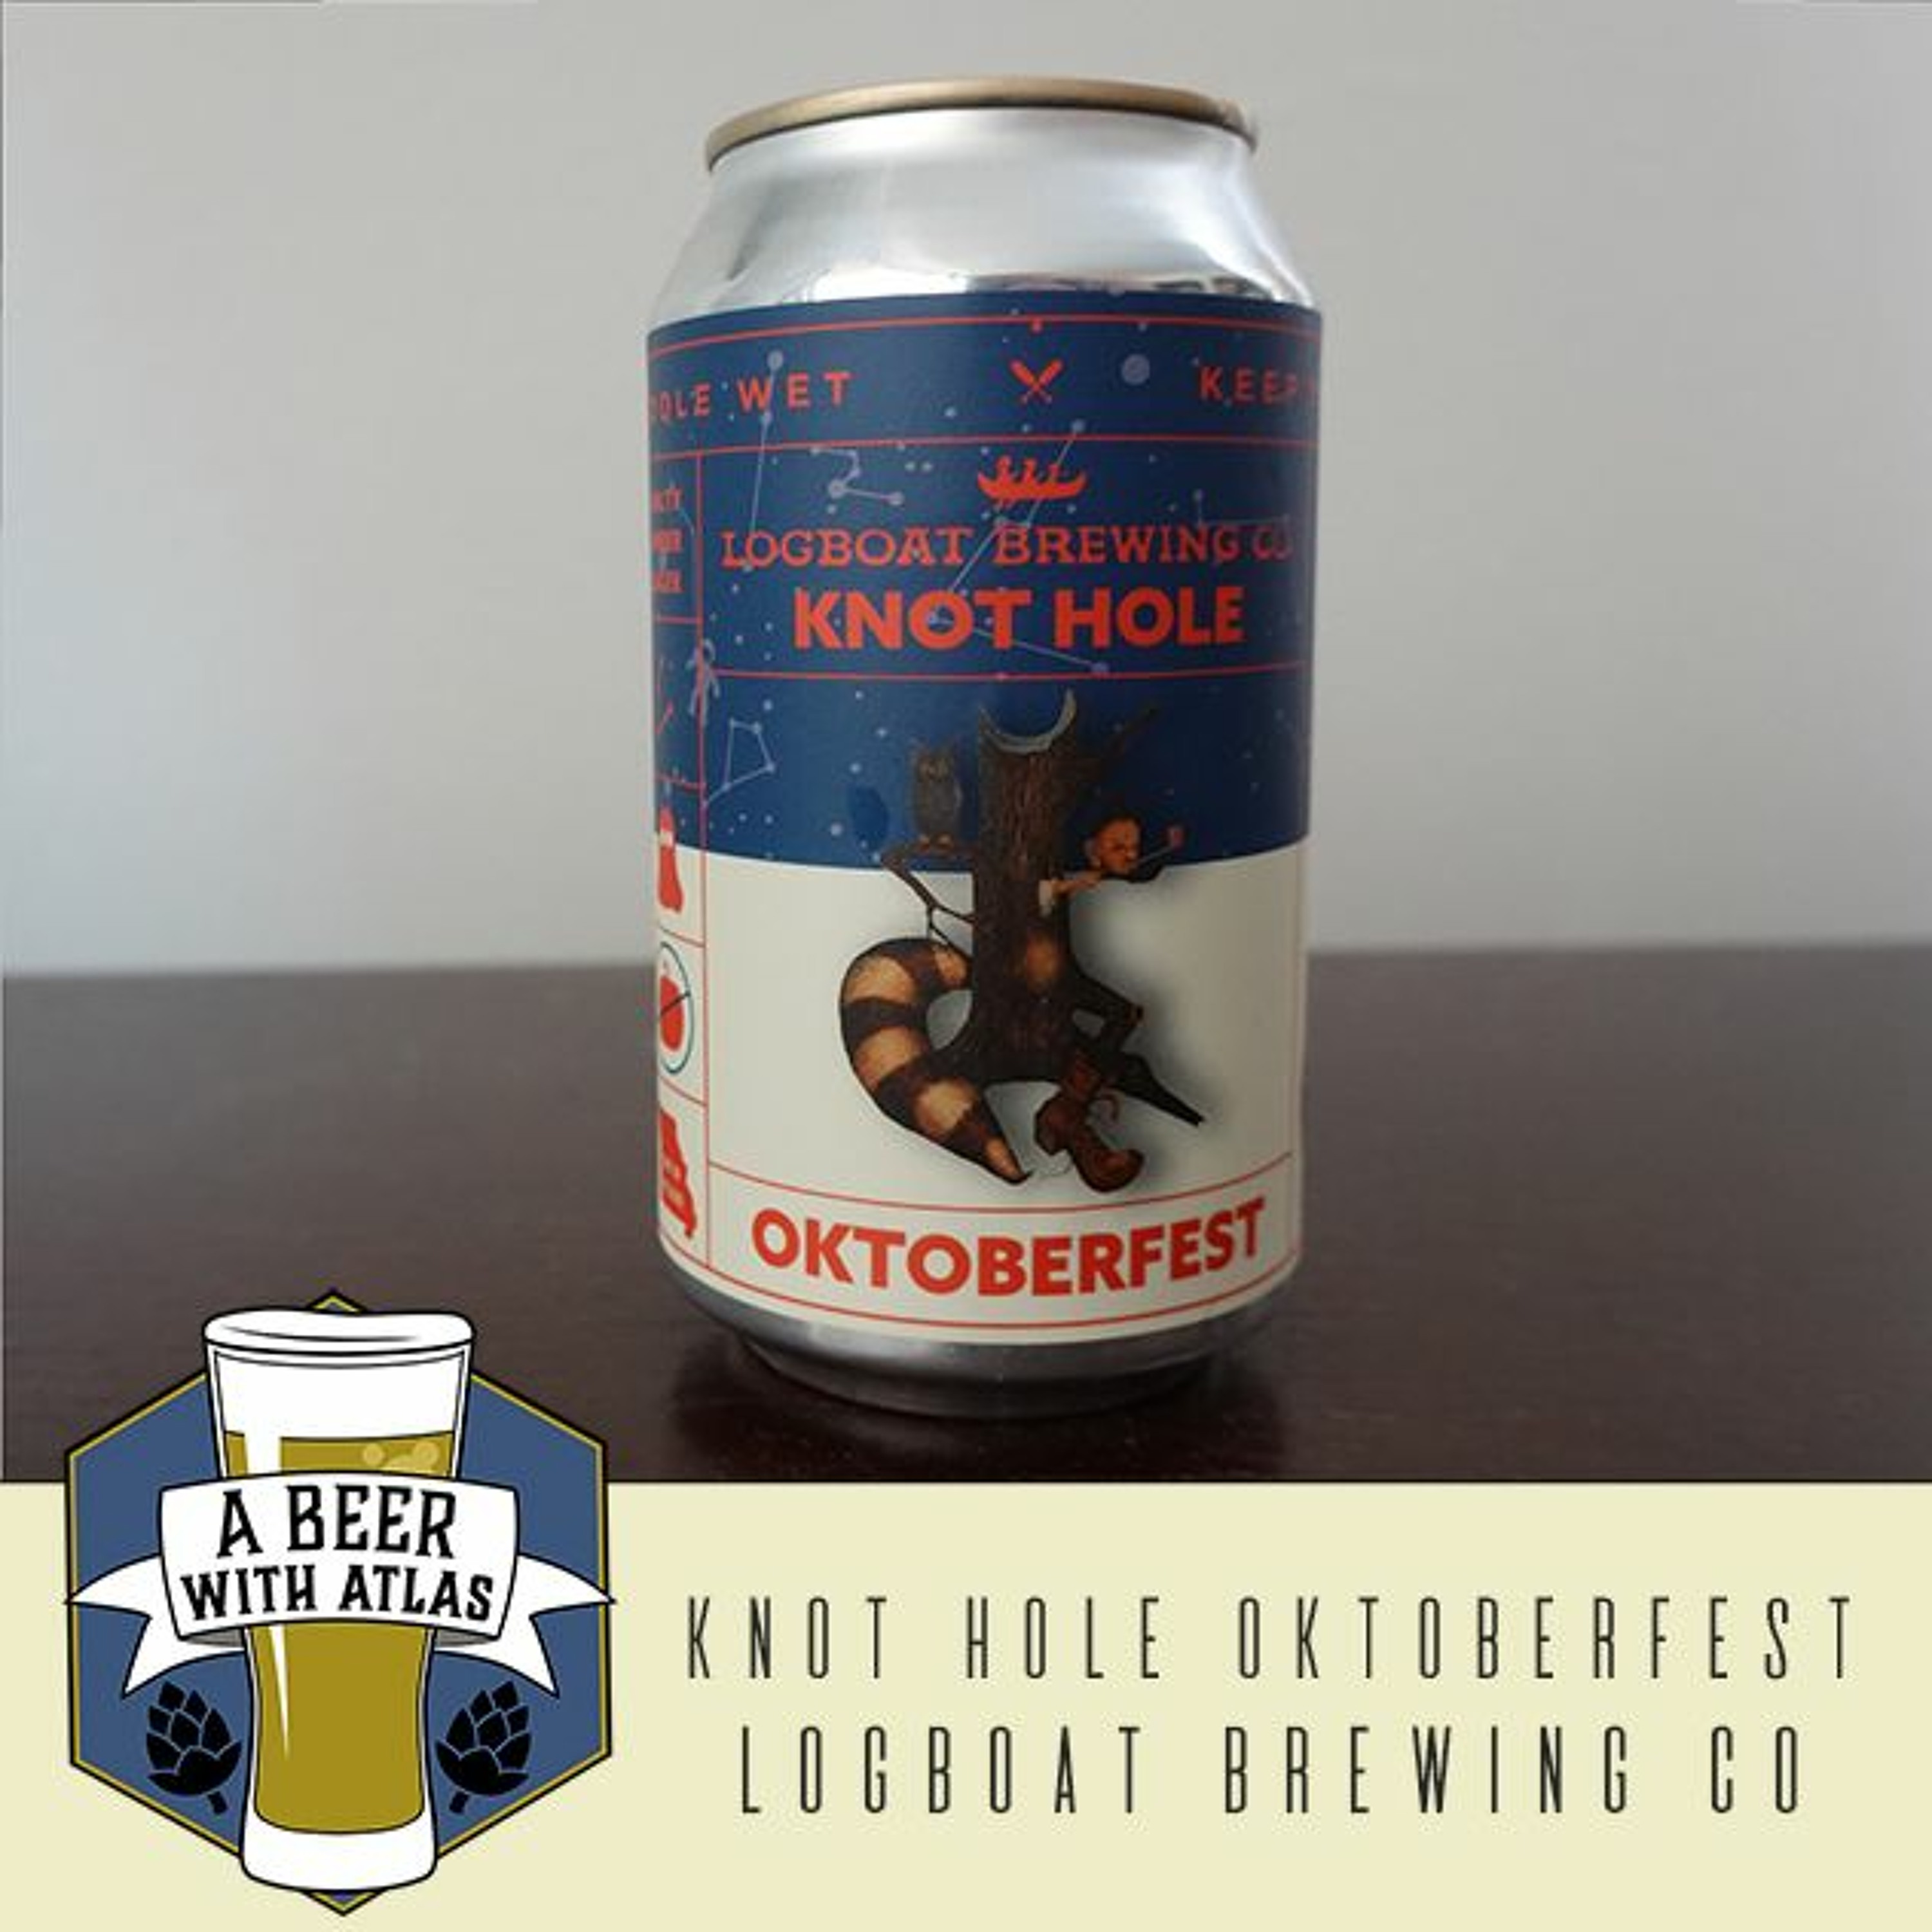 Knot Hole from Logboat Brewing Co - Oktoberfest 1 - Beer With Atlas 110